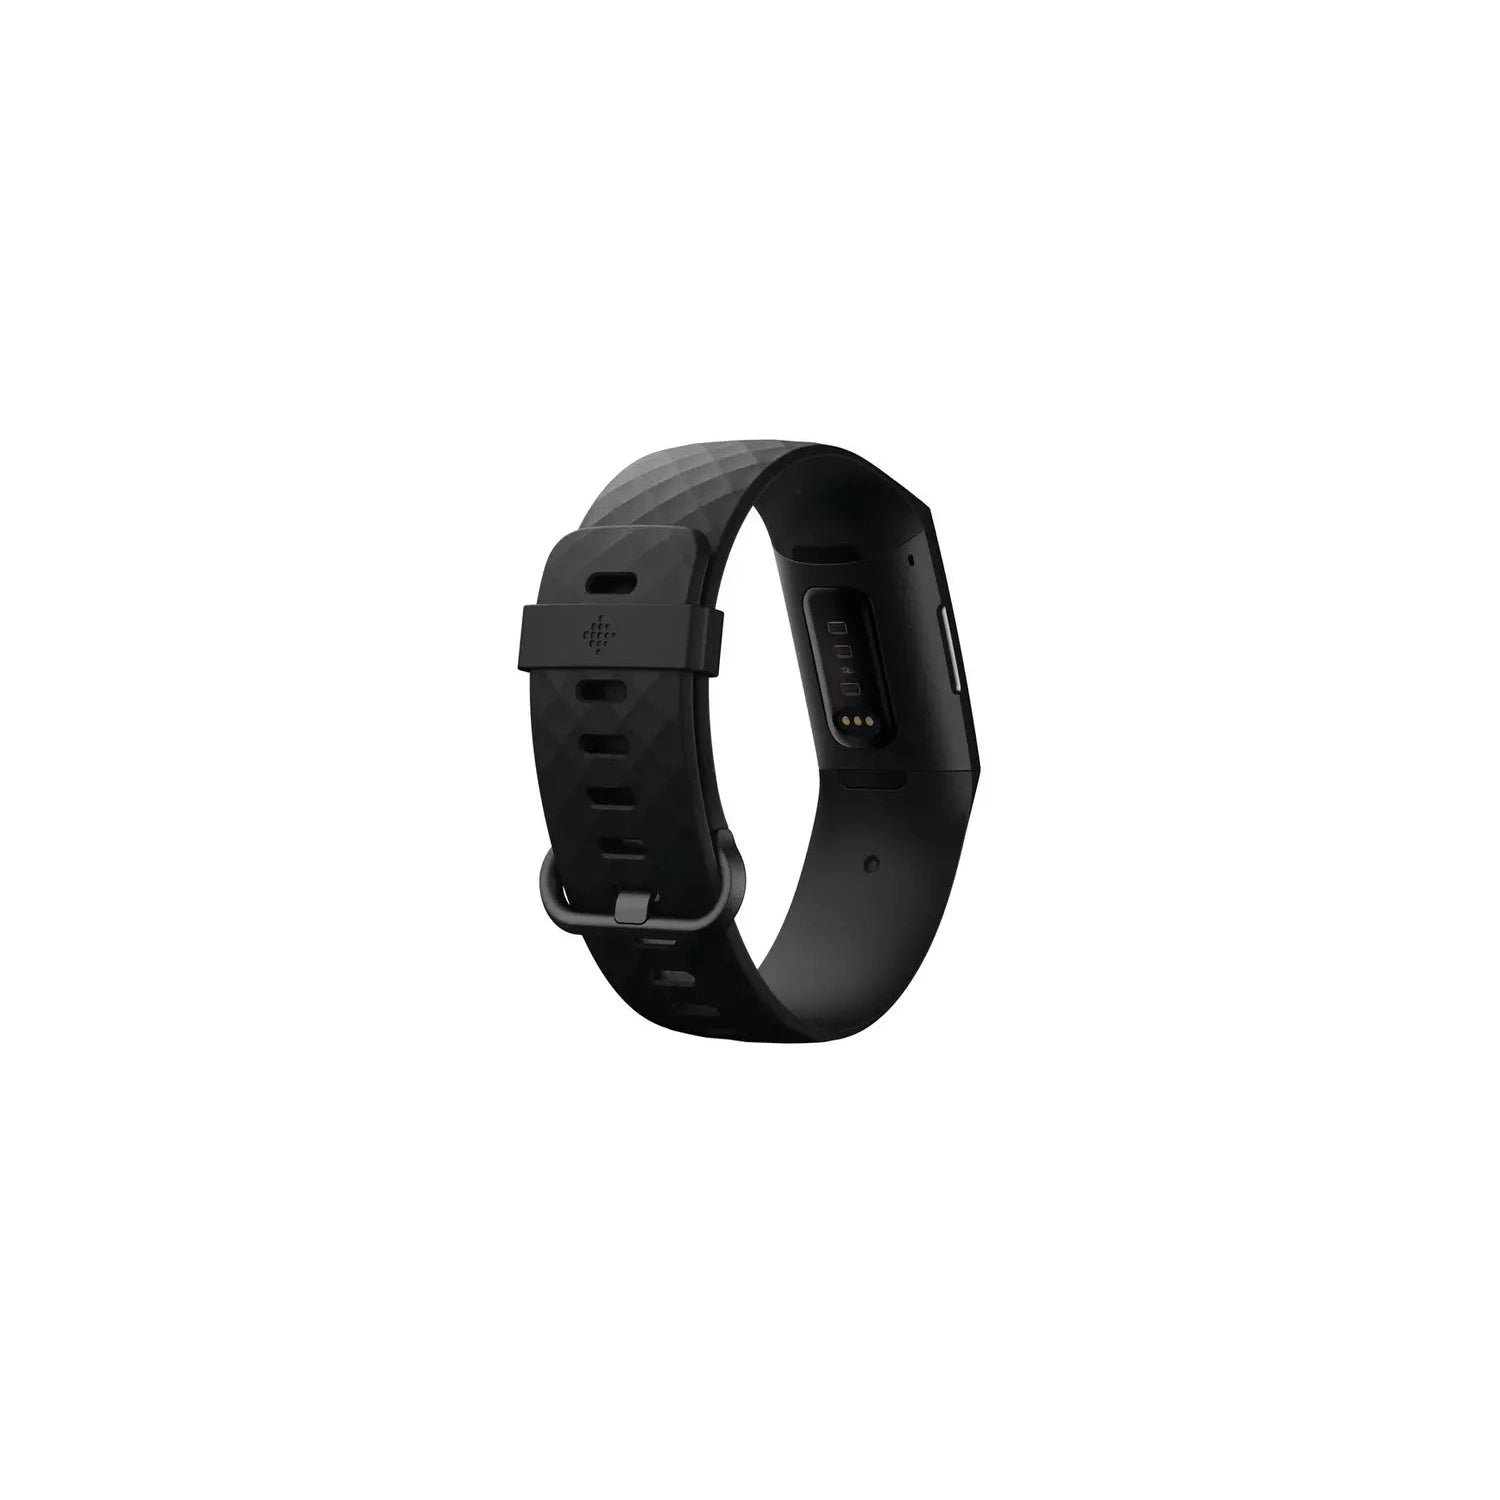 Fitbit Charge 4 Advanced Fitness Tracker with GPS - Black - Refurbished Pristine